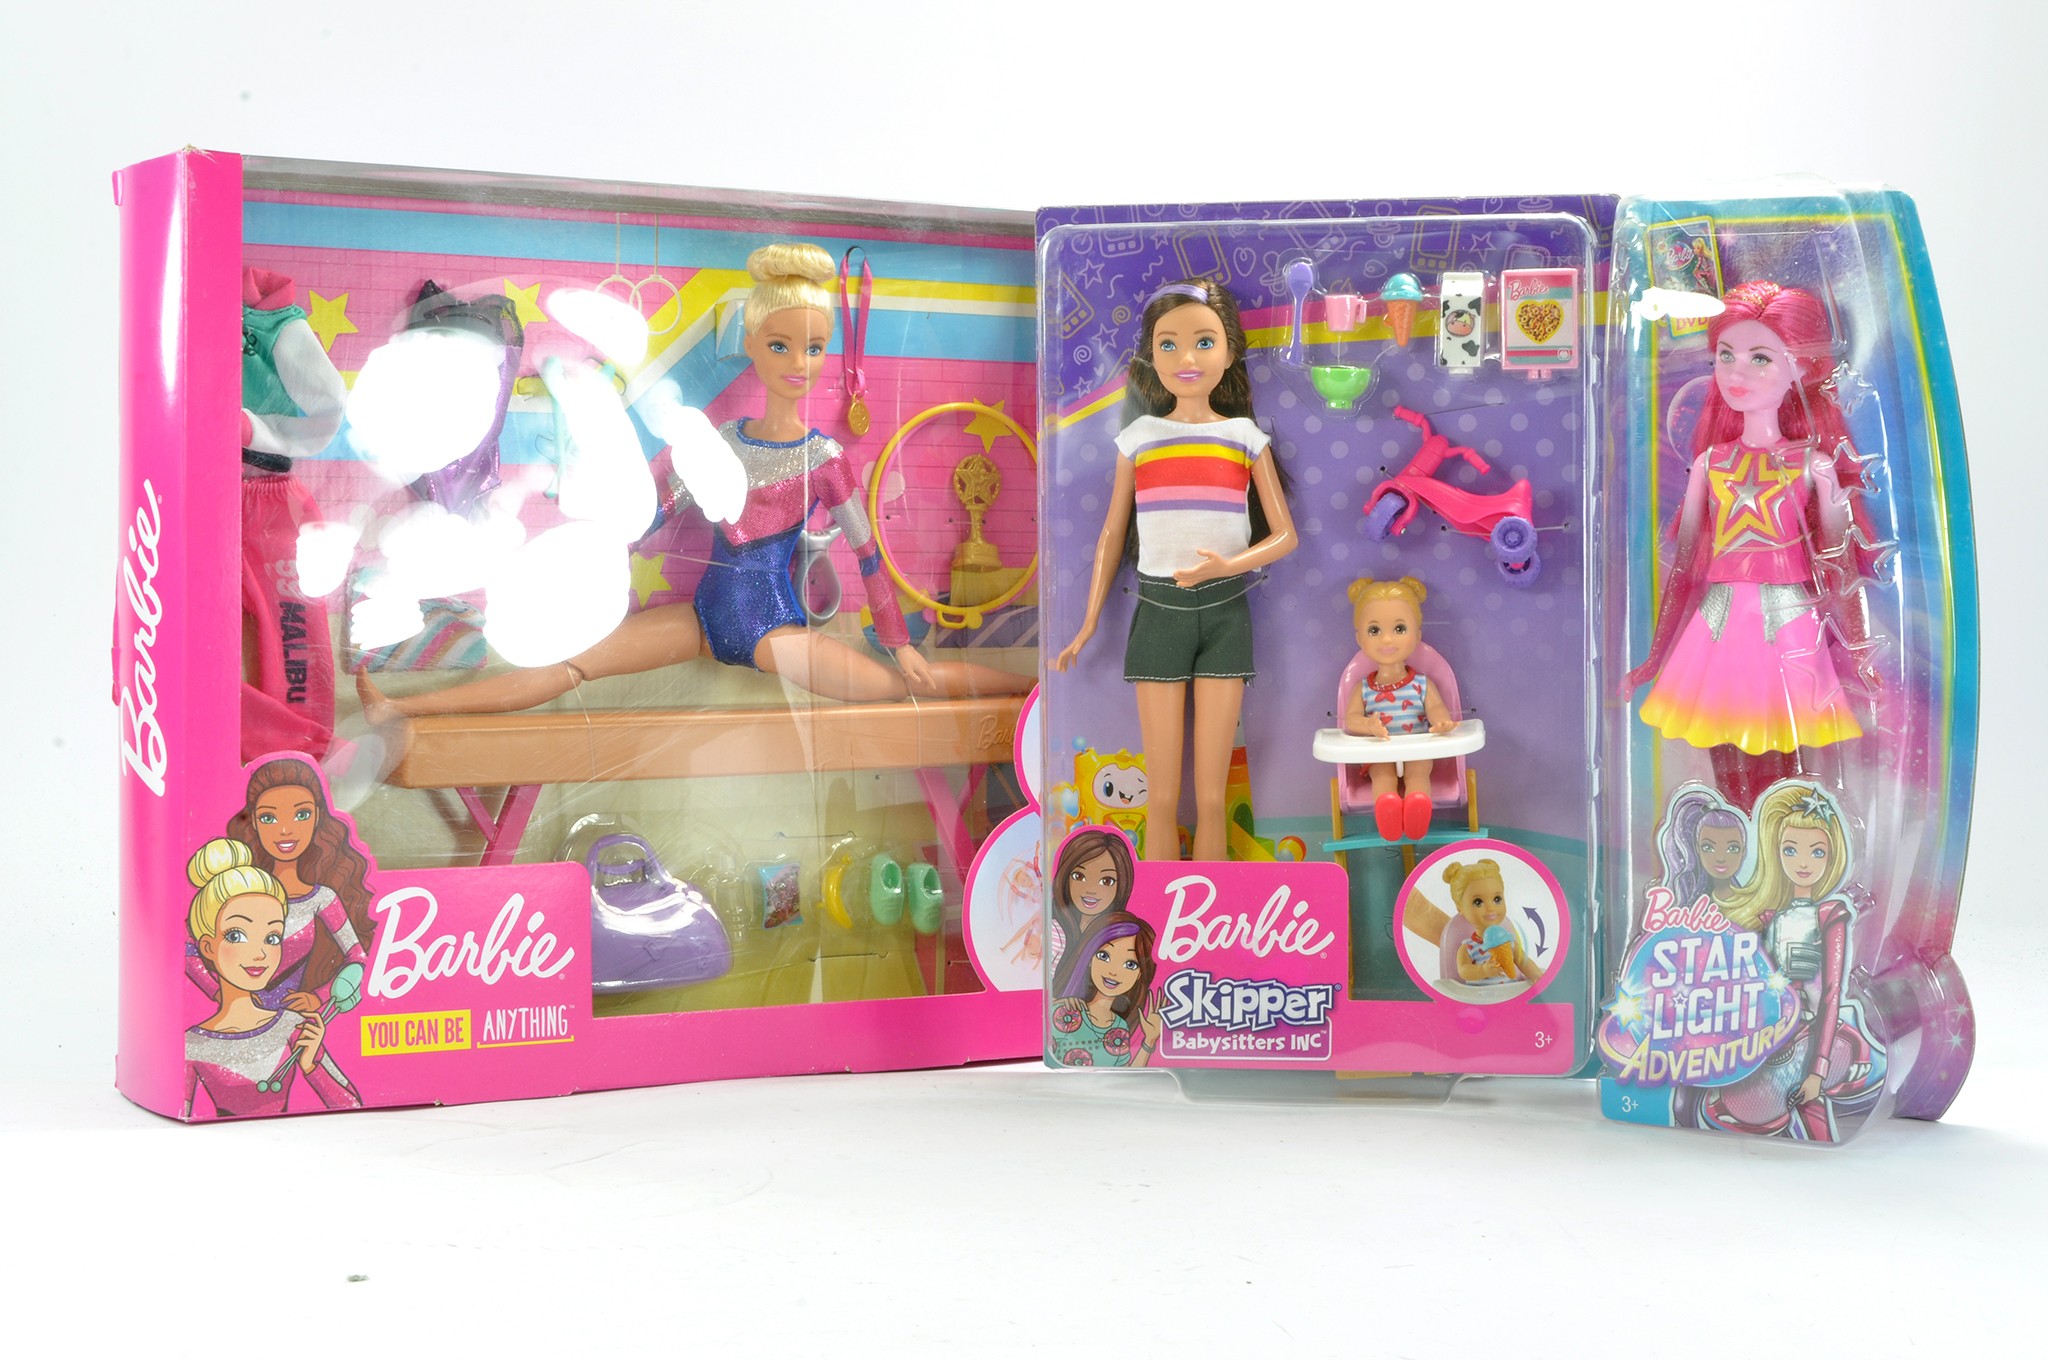 Fashion Dolls comprising Barbie Skipper Babysitters, Star Light Adventure and You can be Anything